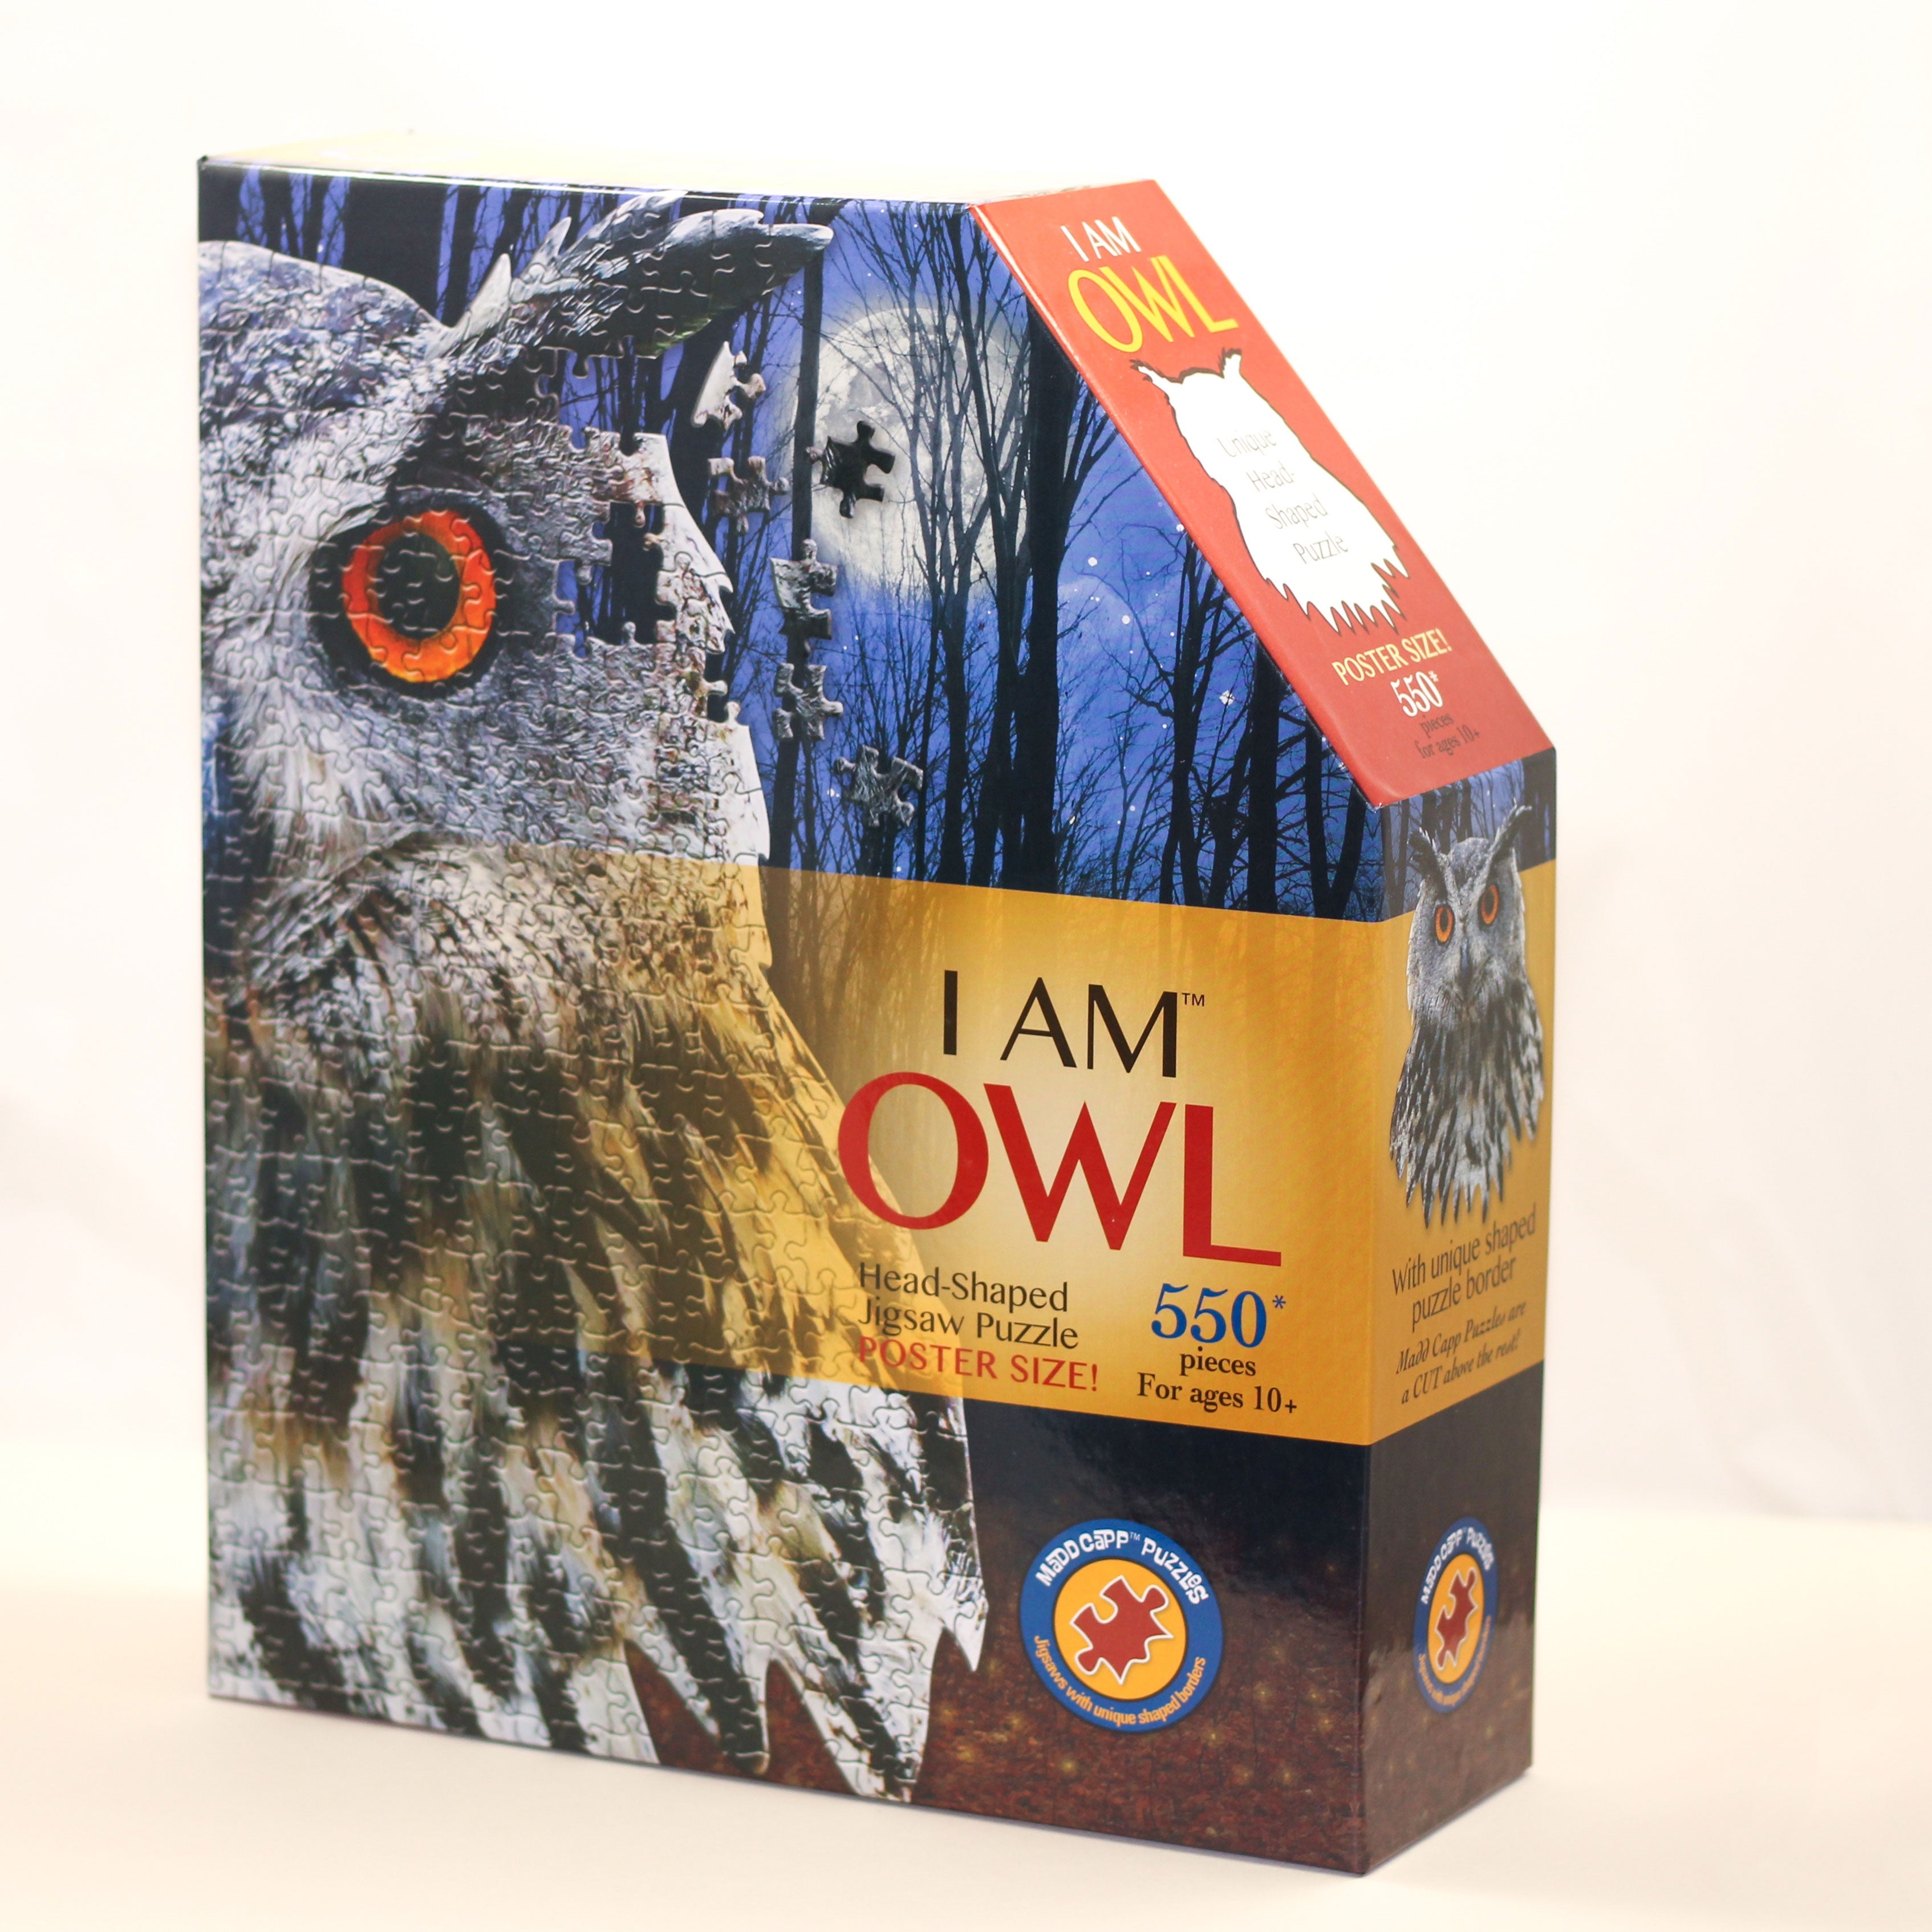 PUZZLE I AM OWL 550 PIECES #41047608 D4 MAY23